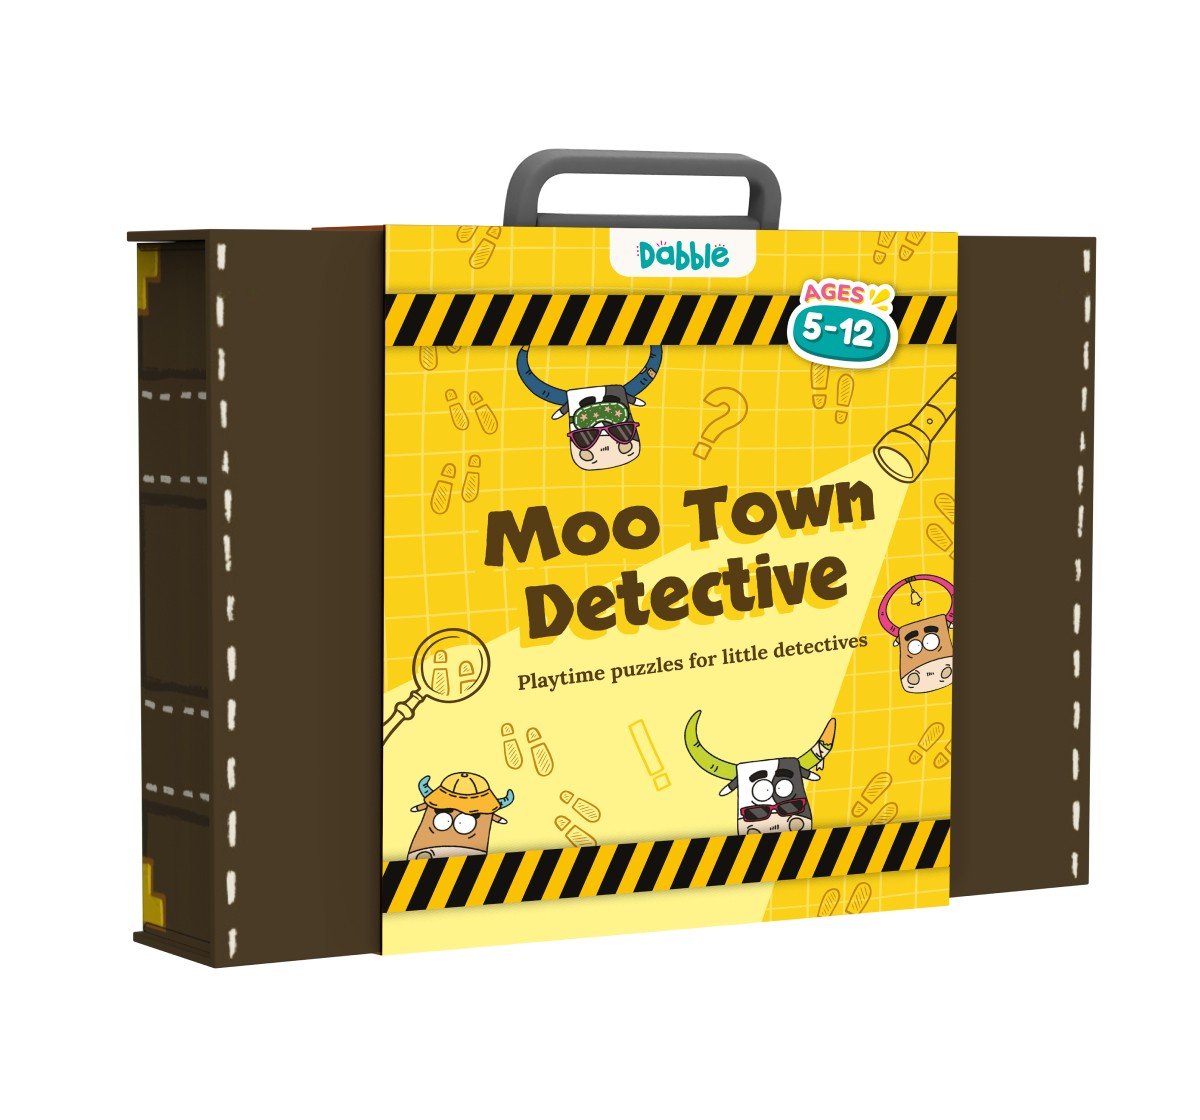 Dabble Pretend Play Detective Game by Playshifu, Moo Town Detective, Kids Detective Set, Kids for 5Y+, Multicolour